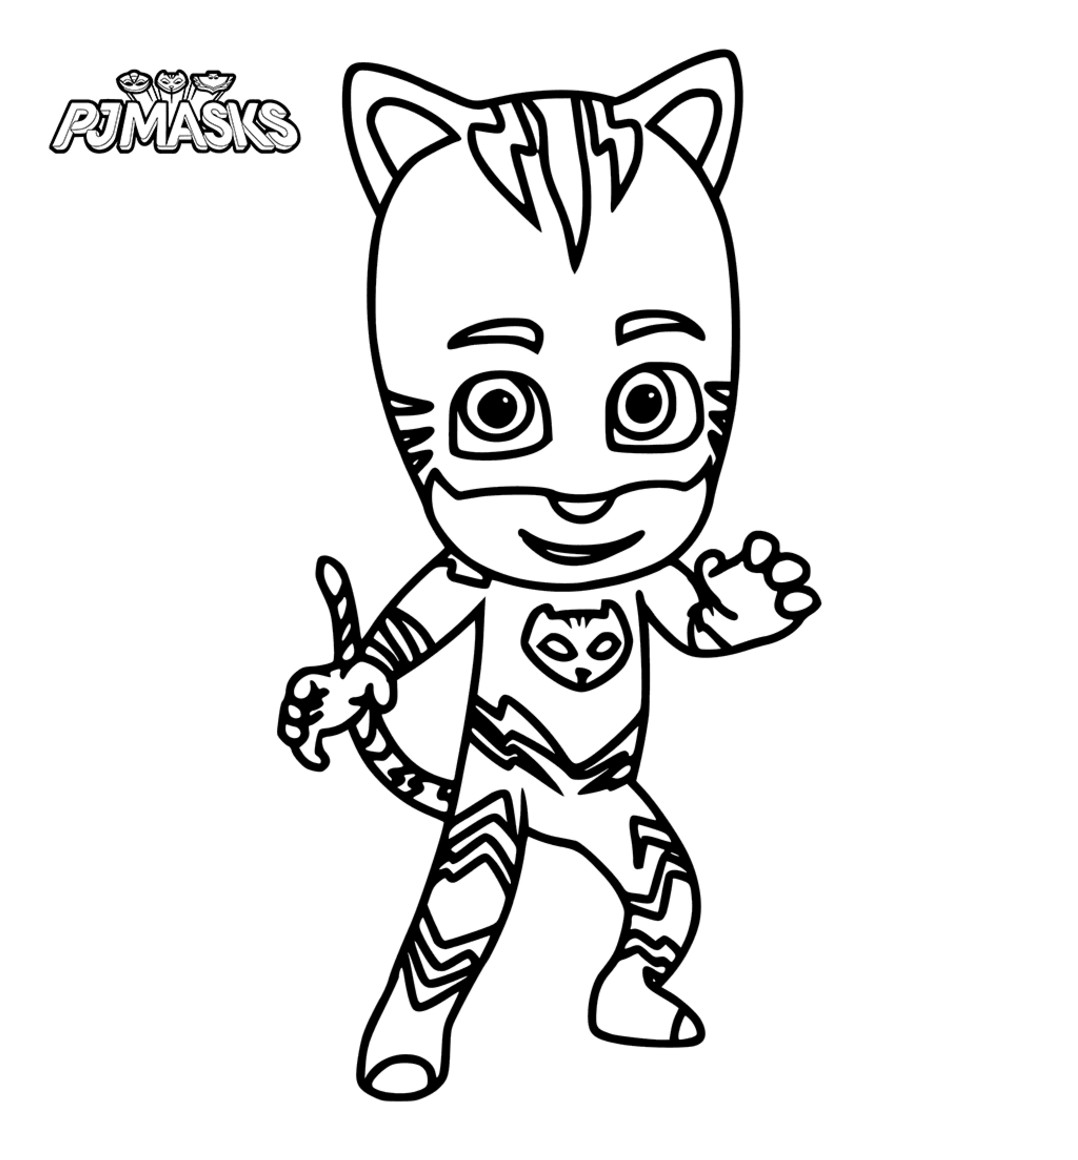 Cat Boy Coloring Pages
 PJ Masks coloring pages to and print for free